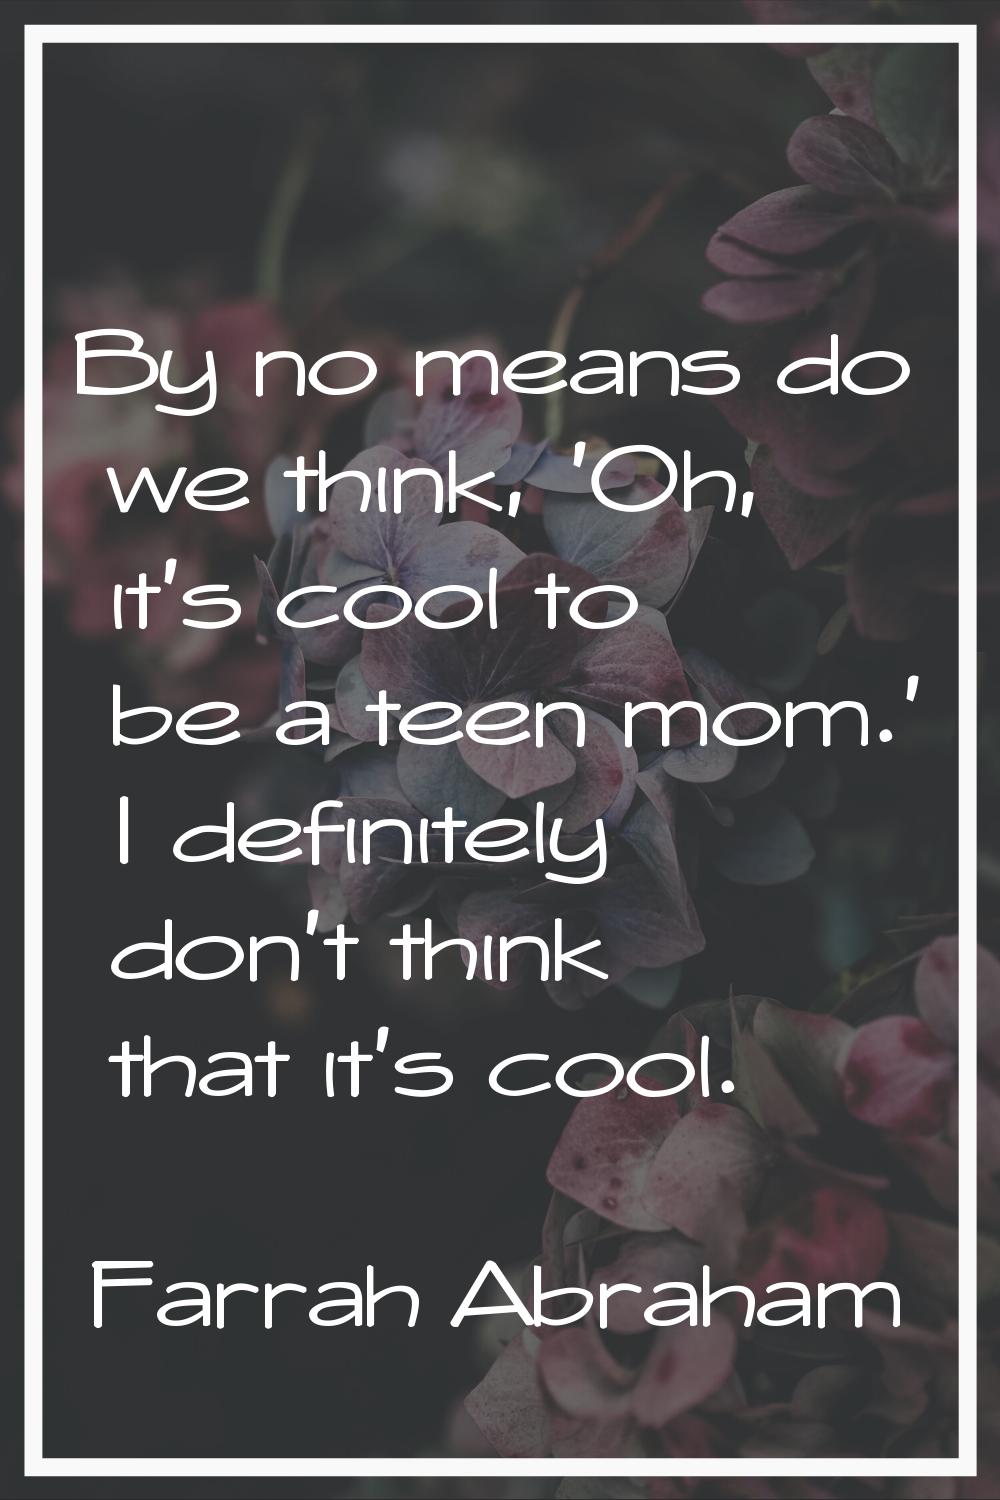 By no means do we think, 'Oh, it's cool to be a teen mom.' I definitely don't think that it's cool.